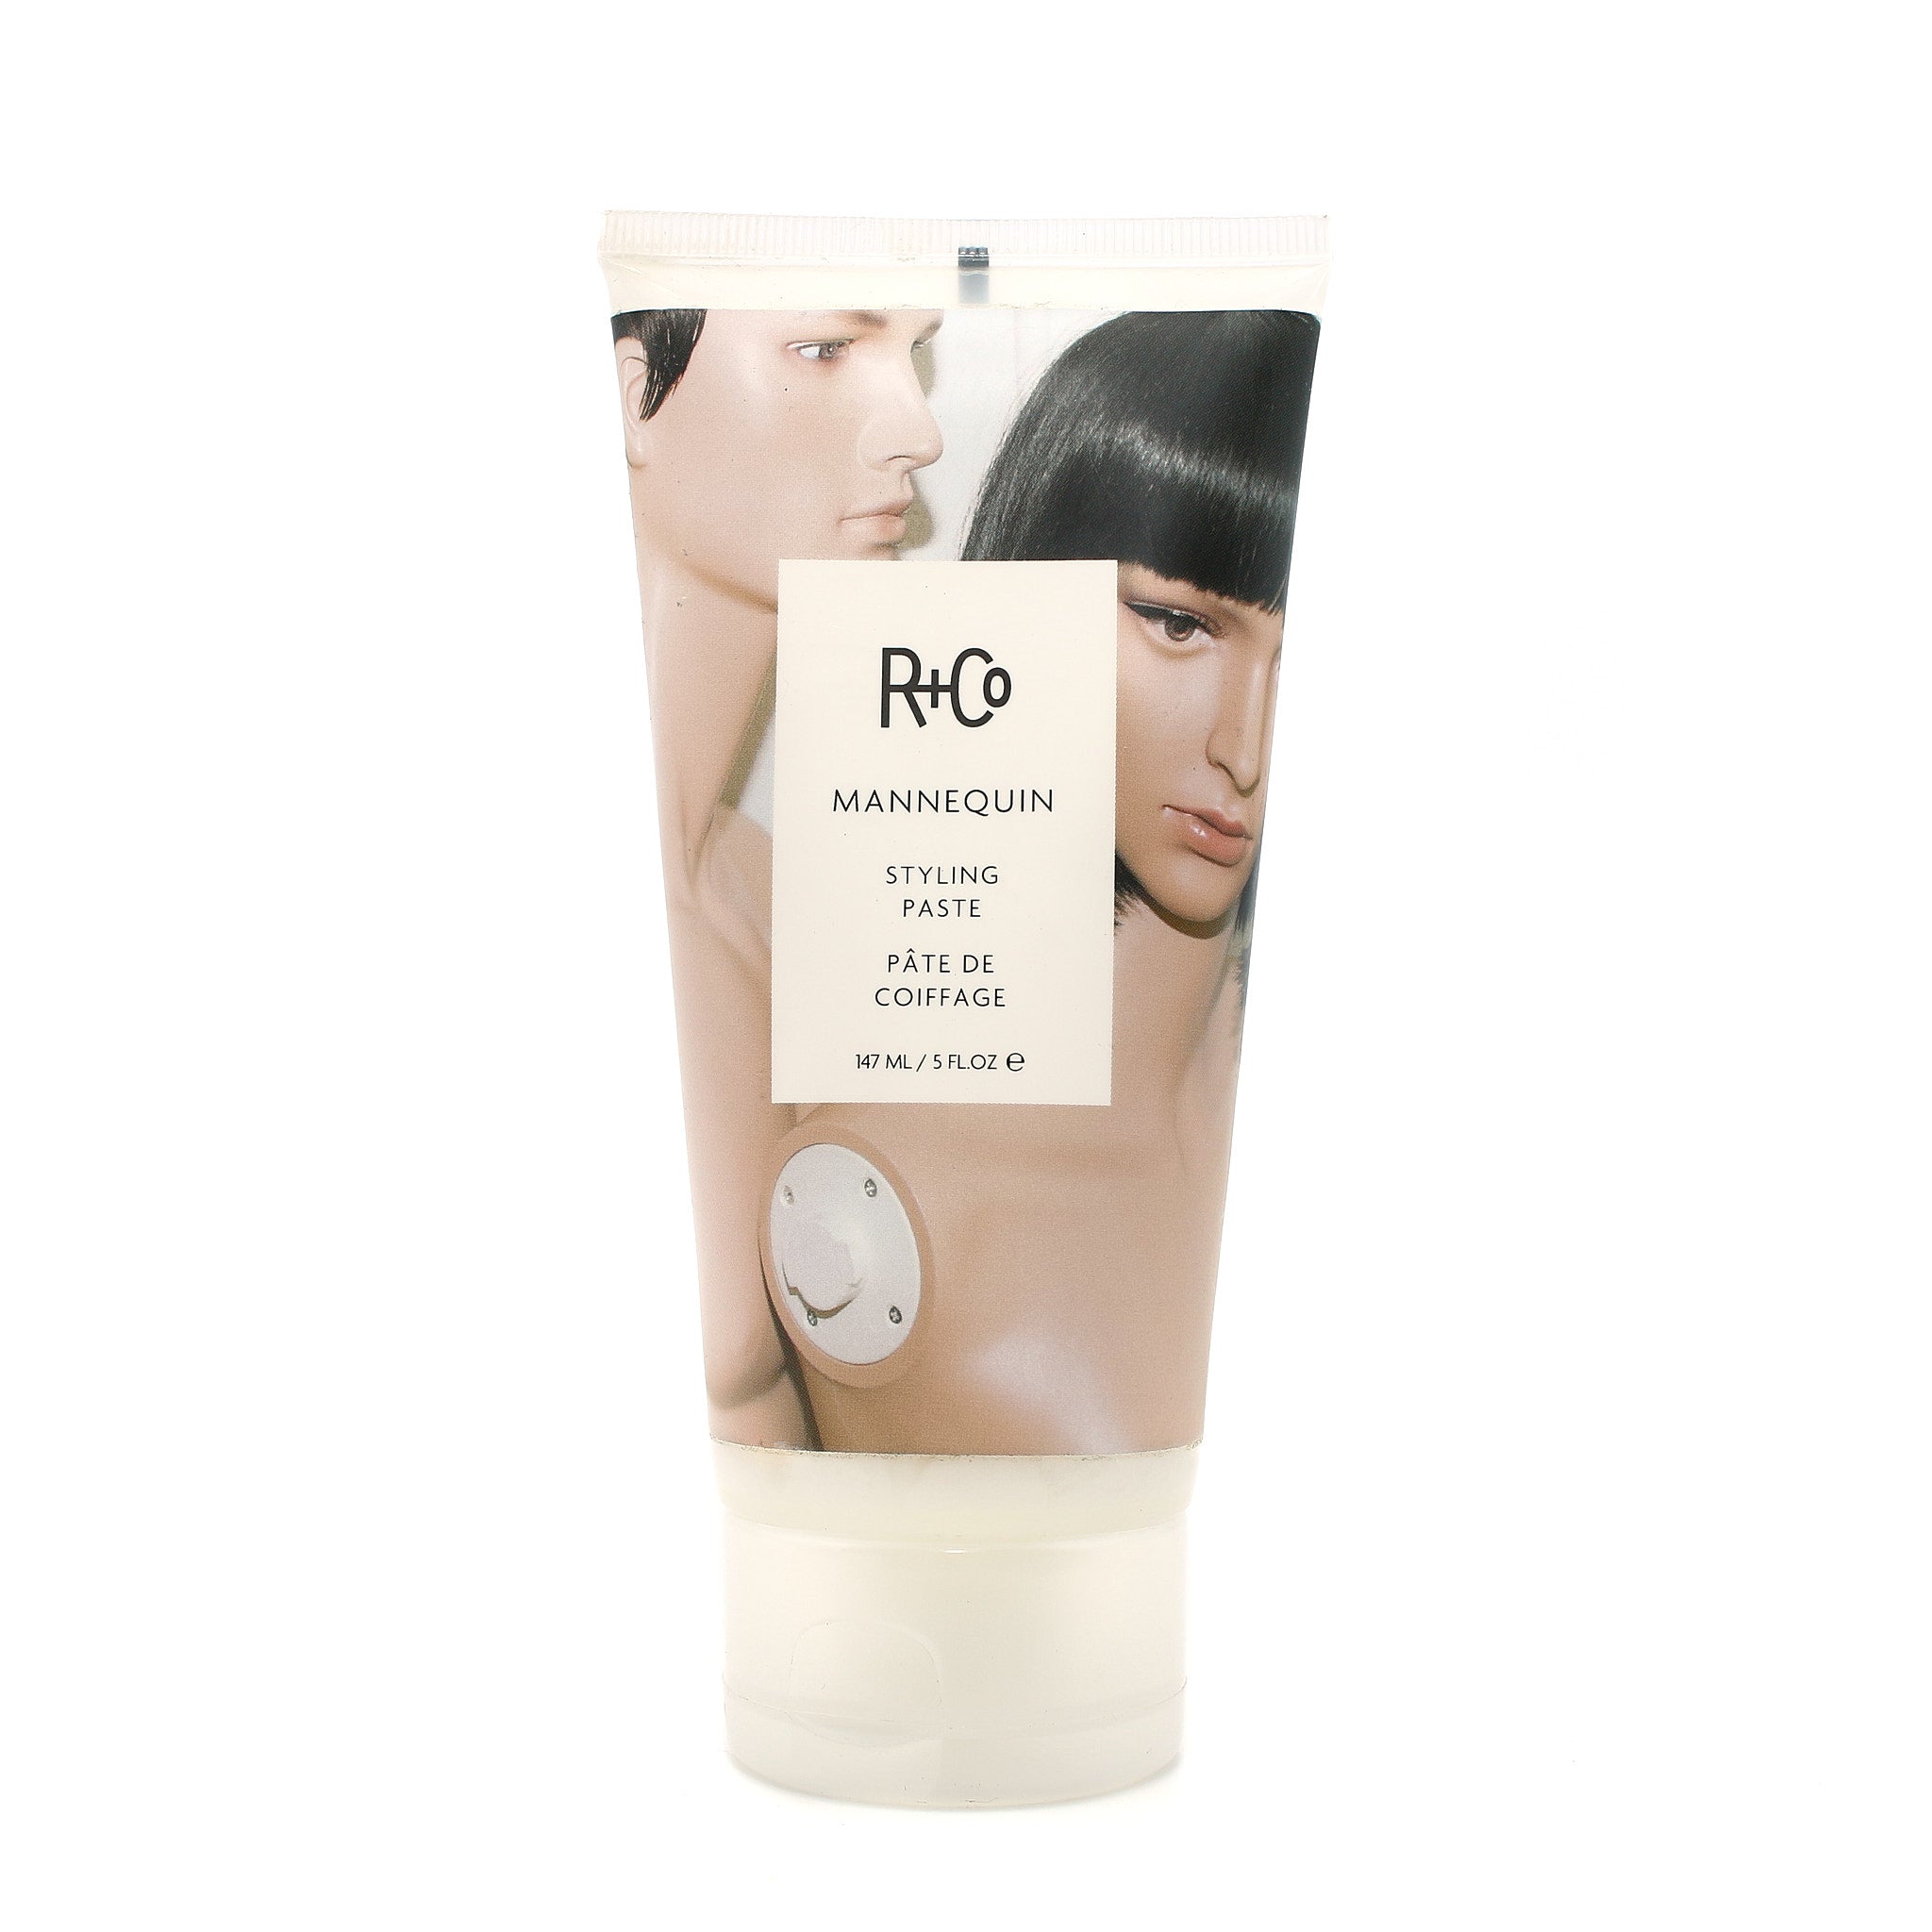 R+CO Mannequin Styling Paste 5 oz